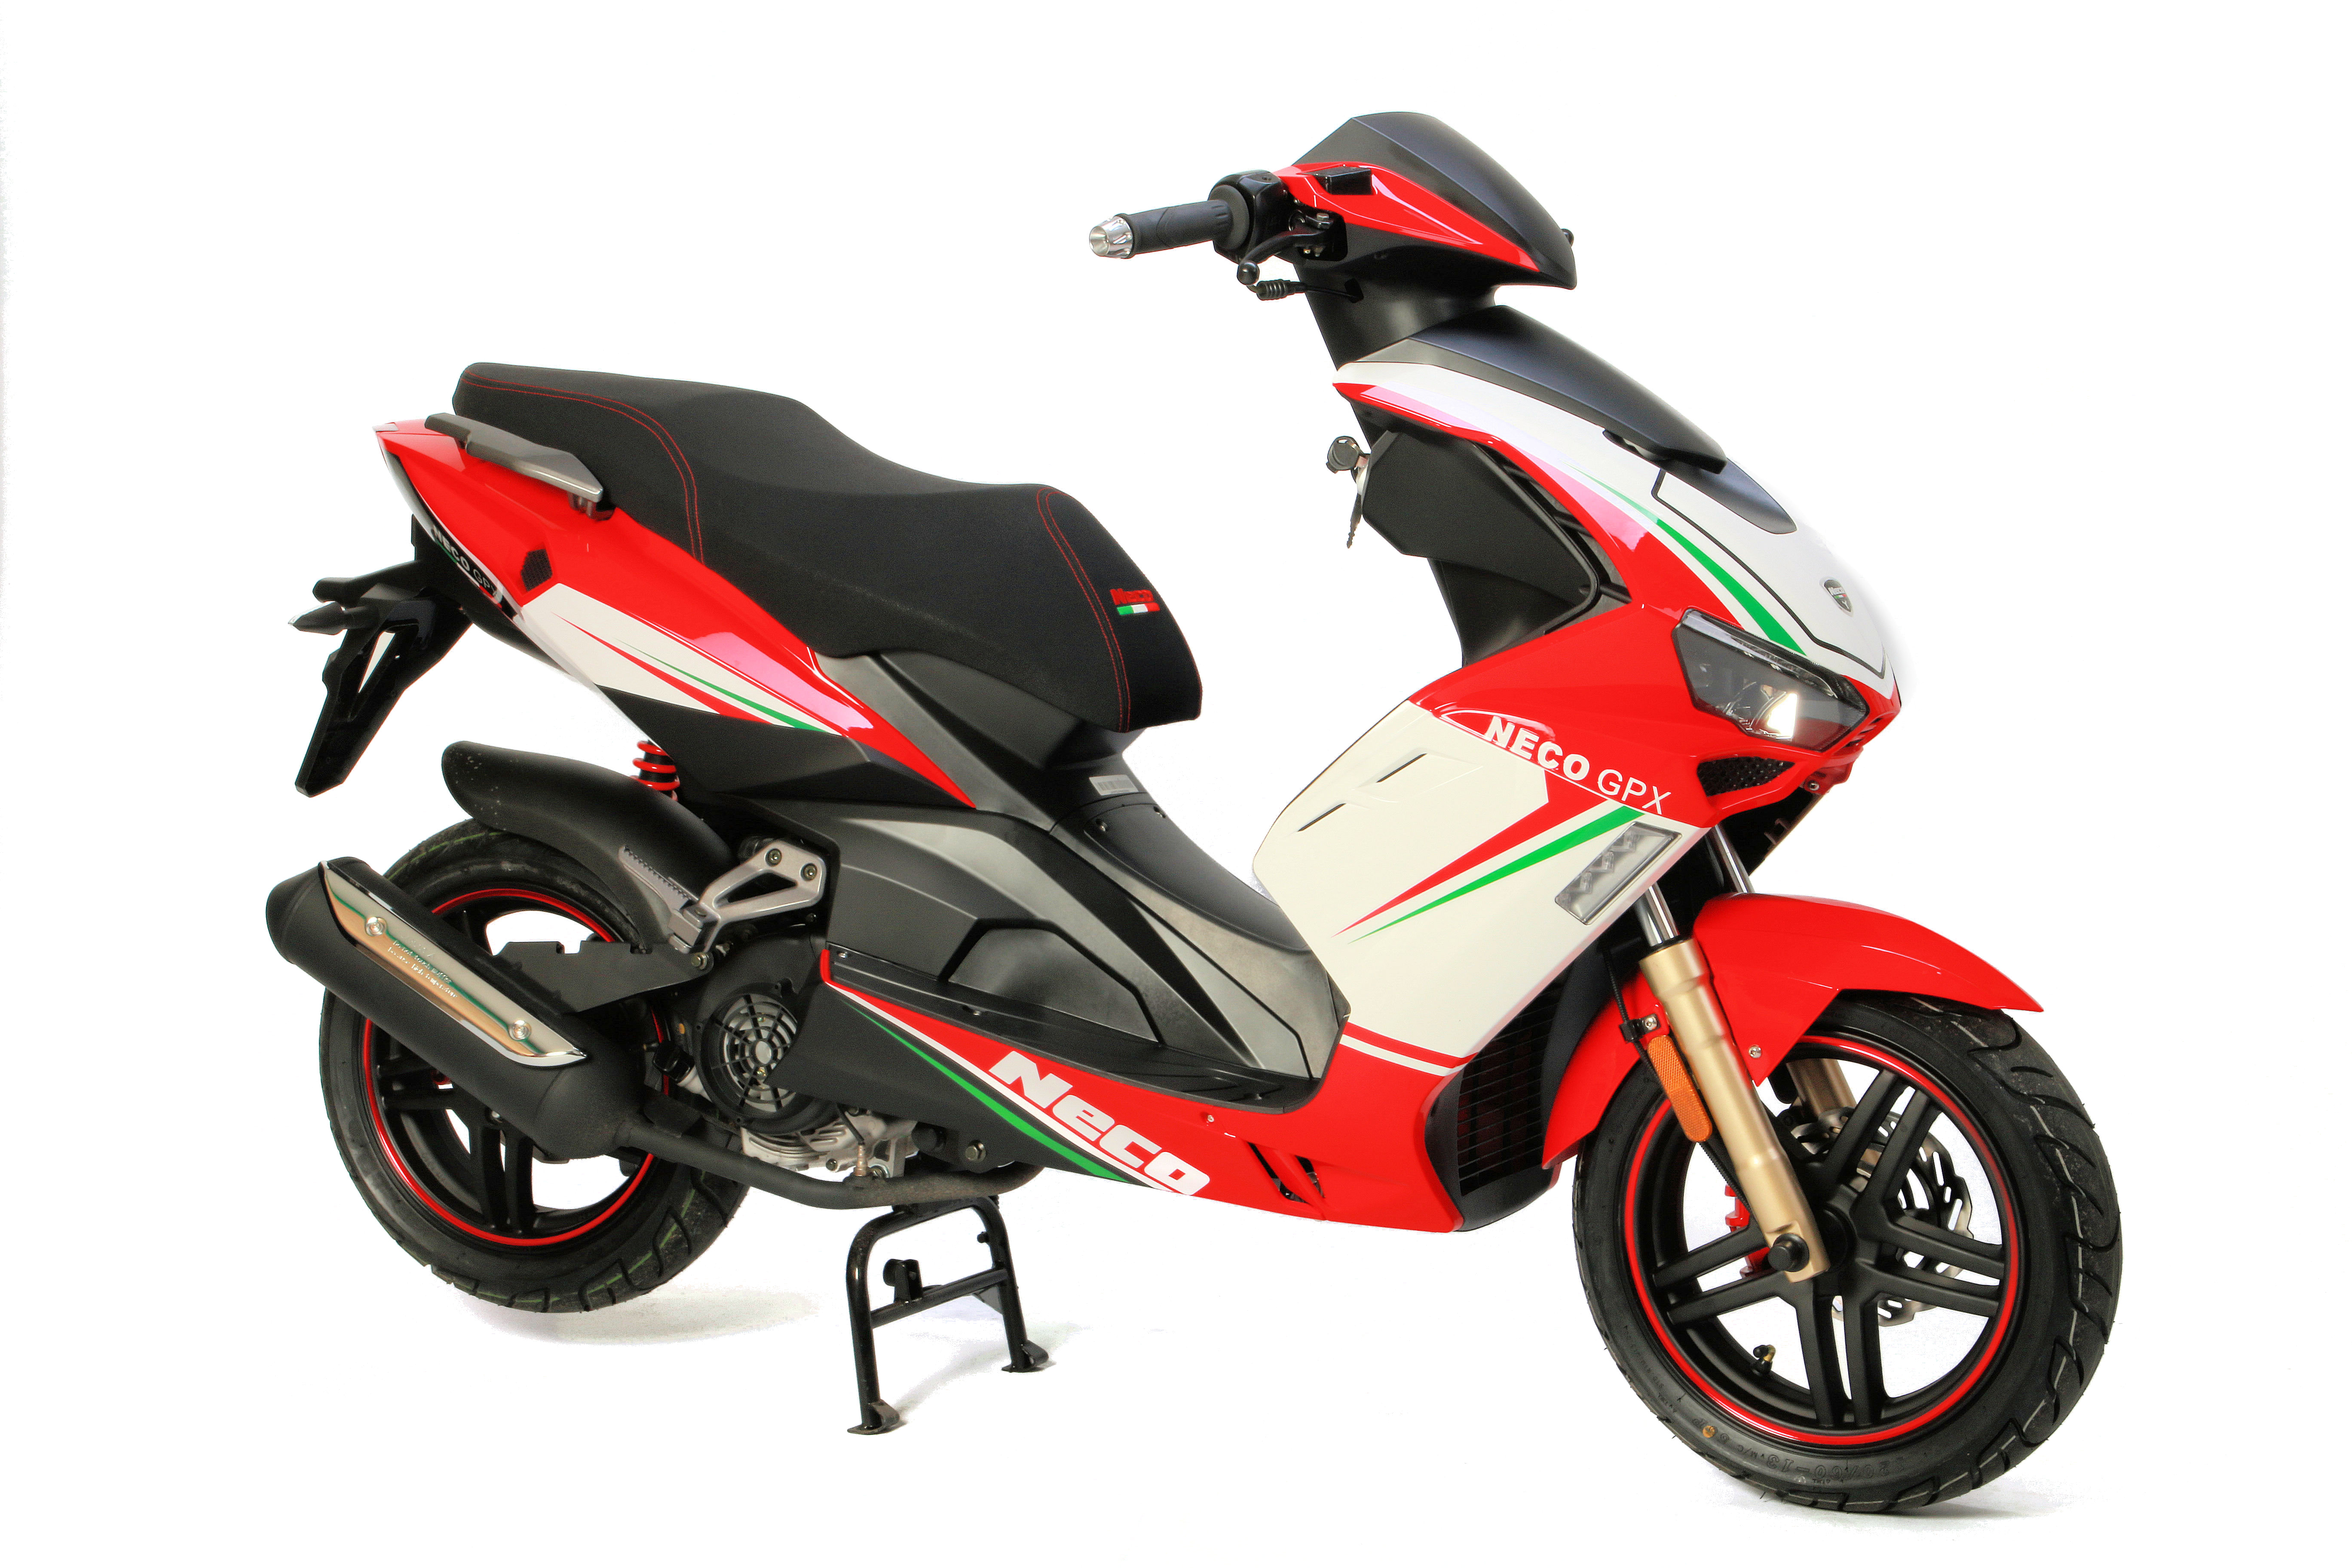 Neco GPX 125cc EFI Euro 4 Finance Available - The Scooter Warehouse